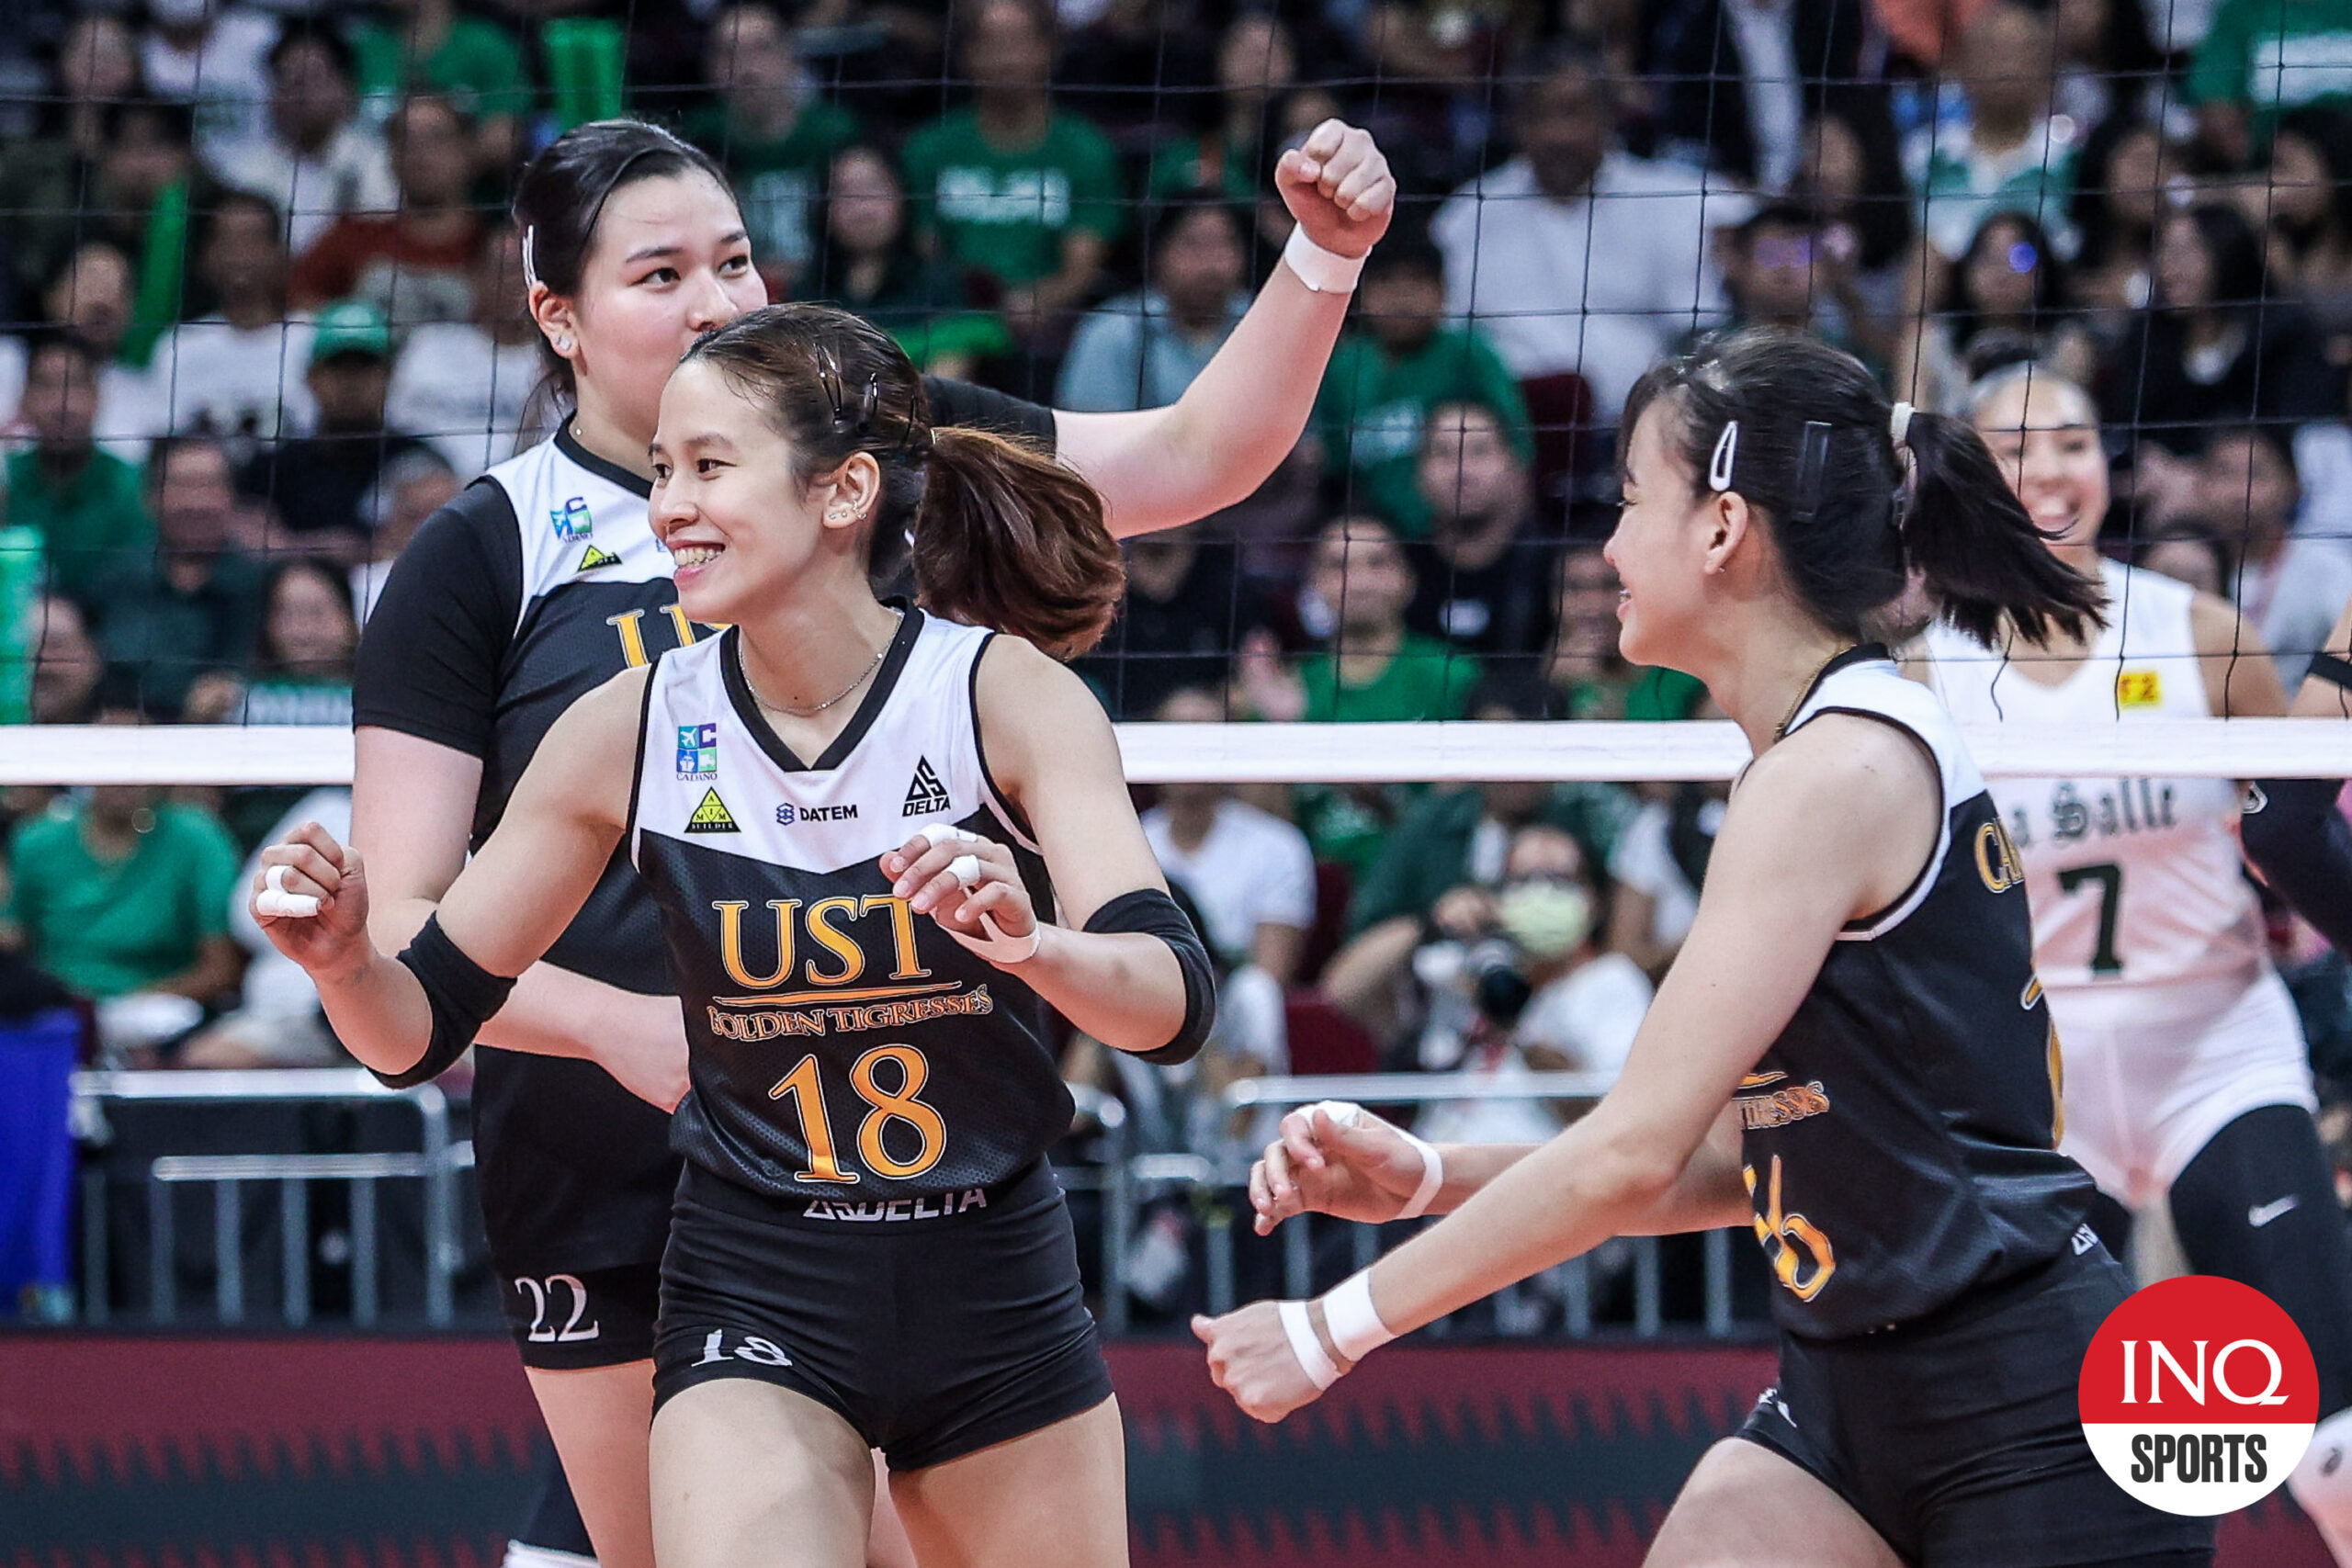 uaap: ust hopes semblance to 2010 title team leads to championship